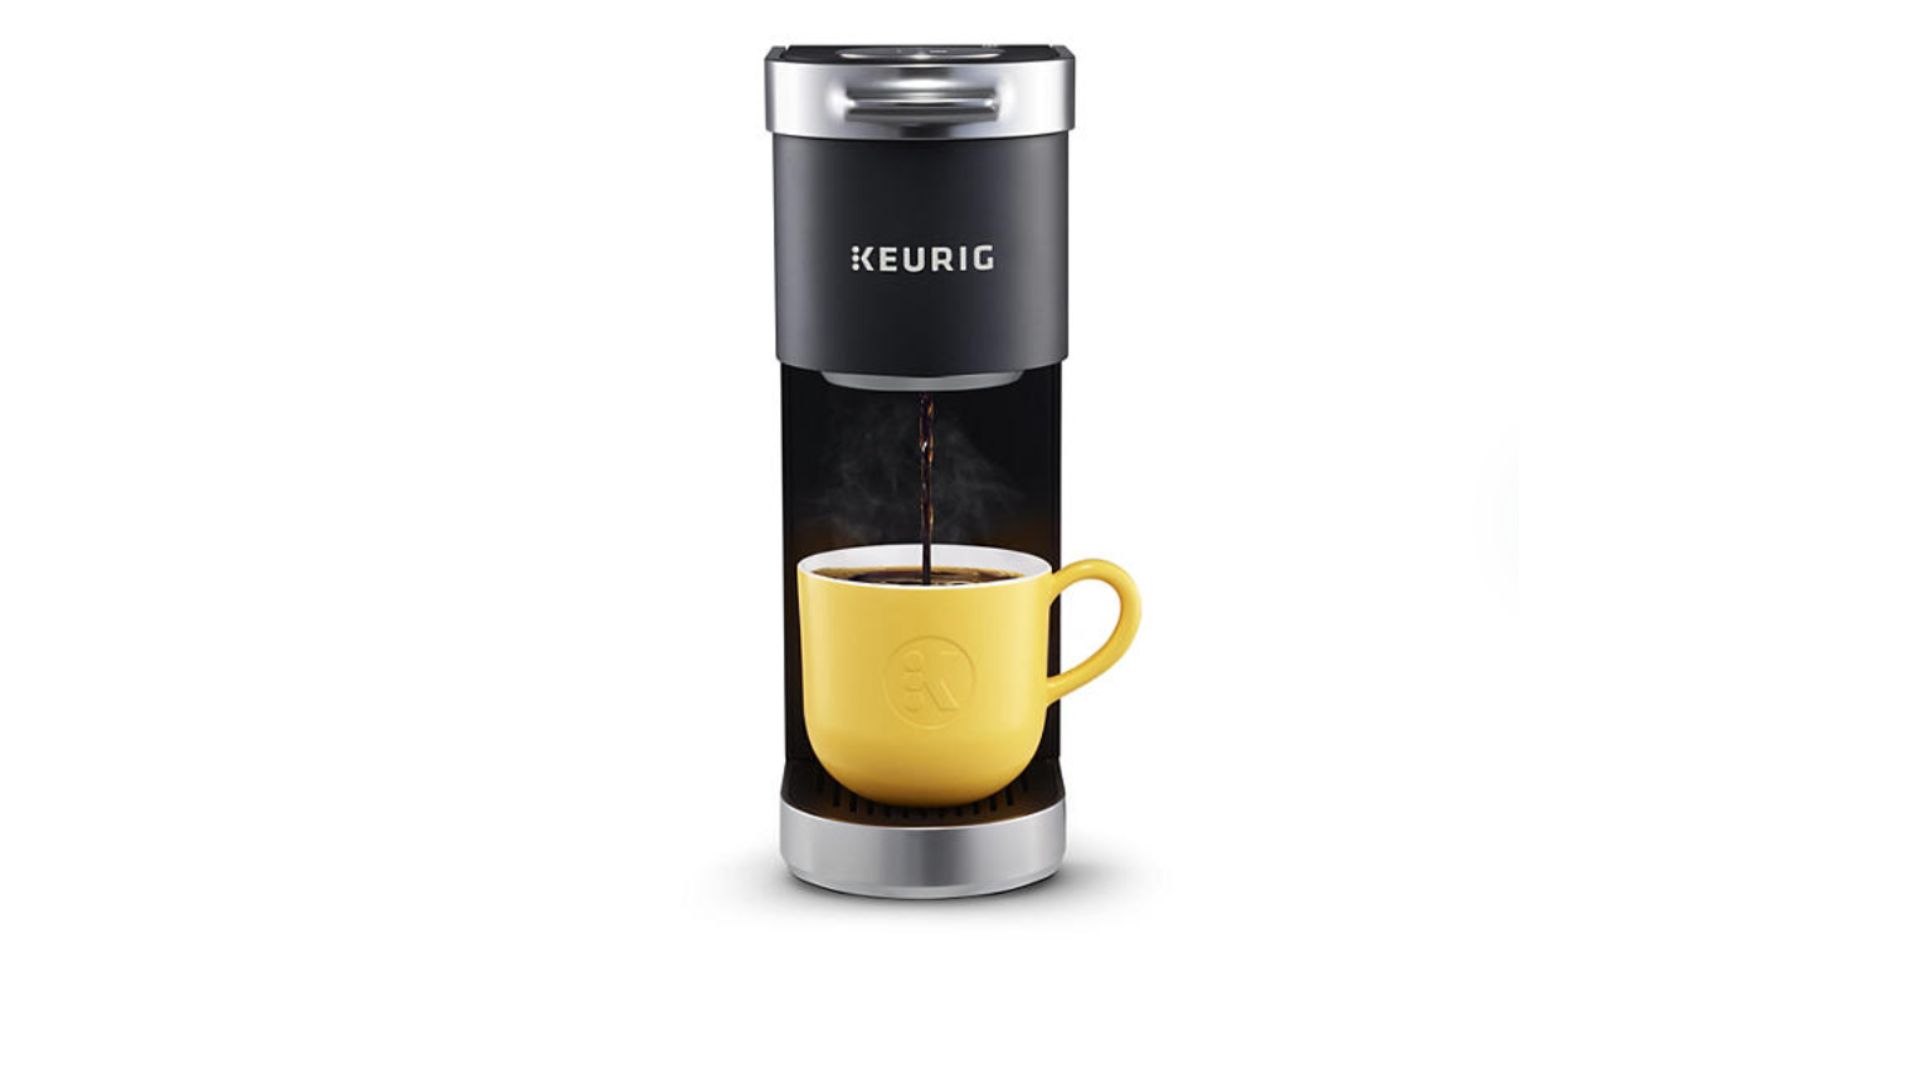 <ul> <li><strong>Price:</strong> <a href="https://www.samsclub.com/p/keurig-k-mini-plus-single-serve-k-cup-pod-coffee-maker-black/P990322710" rel="noreferrer noopener">$89.98</a></li> </ul> <p>Despite having more than 1,200 five-star ratings, the Keurig K-Mini coffee maker isn't a hit with all Sam's Club members. Currently, the product has 279 one-star reviews.</p> <p>One recurring complaint was that the Keurig didn't work well and broke easily. </p> <p>"I've bought two of these and the first one quit after three or four months," wrote reviewer FreakyGranny. "I thought maybe I just got a lemon but then when I purchased the next one it lasted about the same amount of time. Will never buy again!"</p>